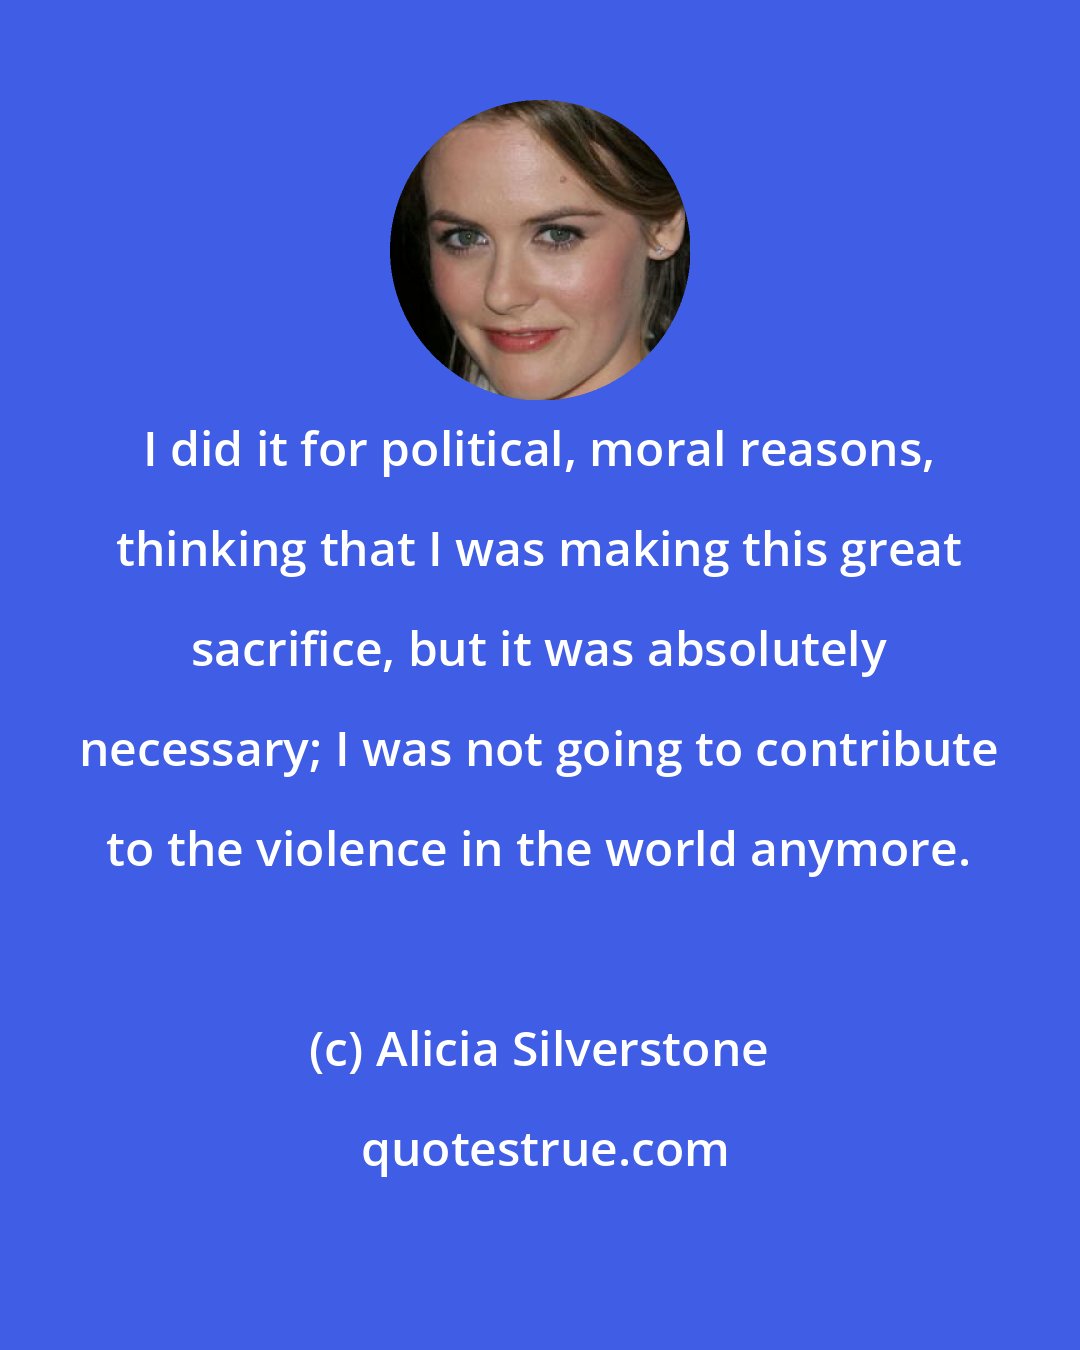 Alicia Silverstone: I did it for political, moral reasons, thinking that I was making this great sacrifice, but it was absolutely necessary; I was not going to contribute to the violence in the world anymore.